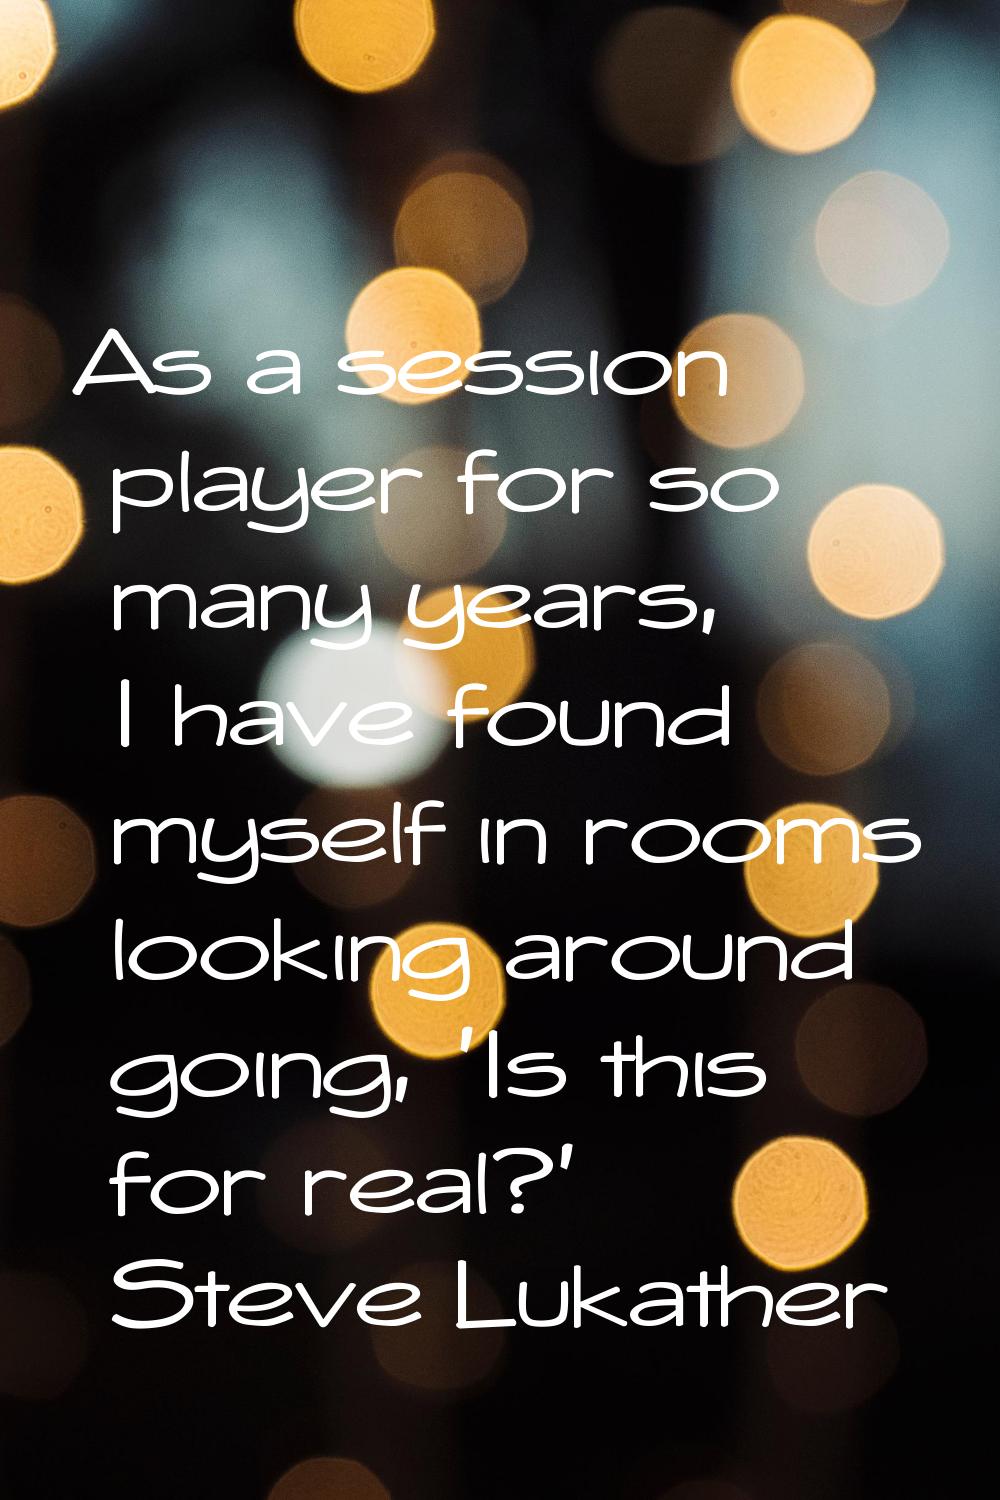 As a session player for so many years, I have found myself in rooms looking around going, 'Is this 